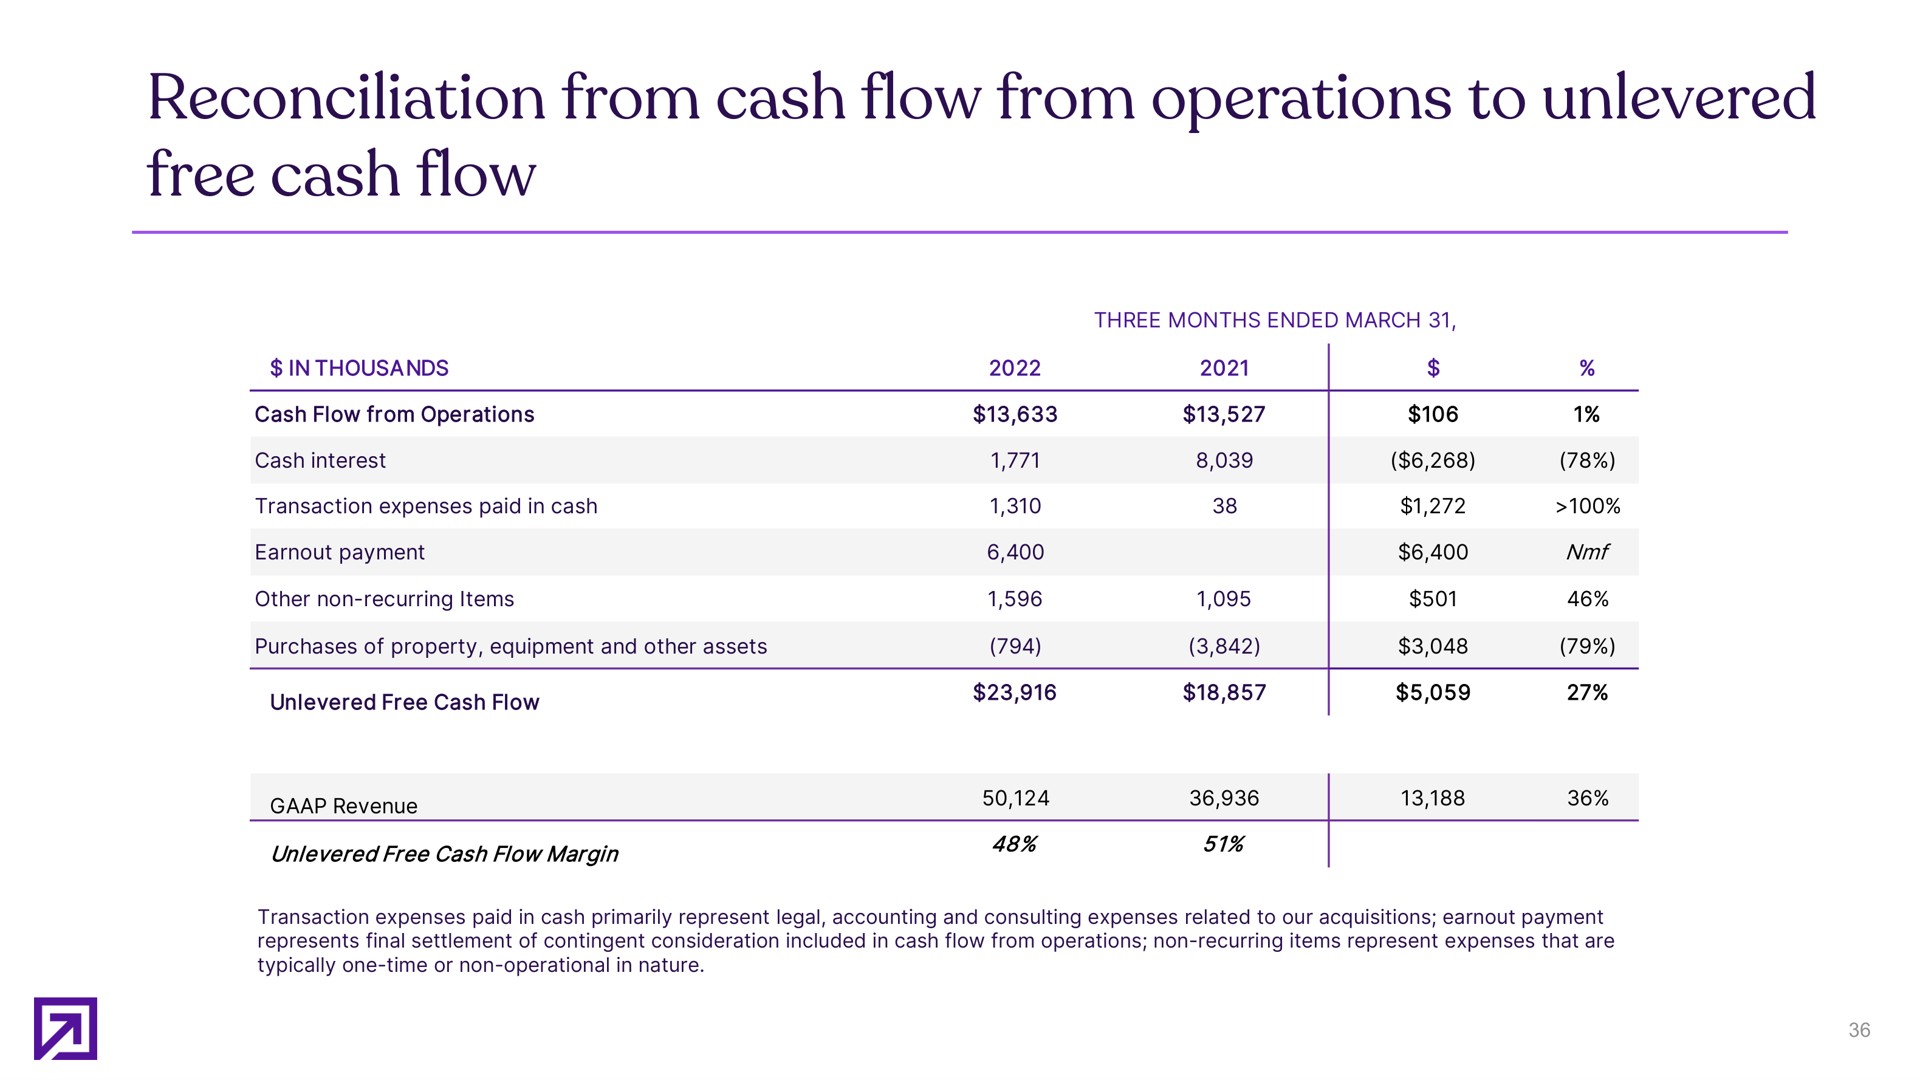 reconciliation from cash flow from operations to free cash flow | Definitive Healthcare